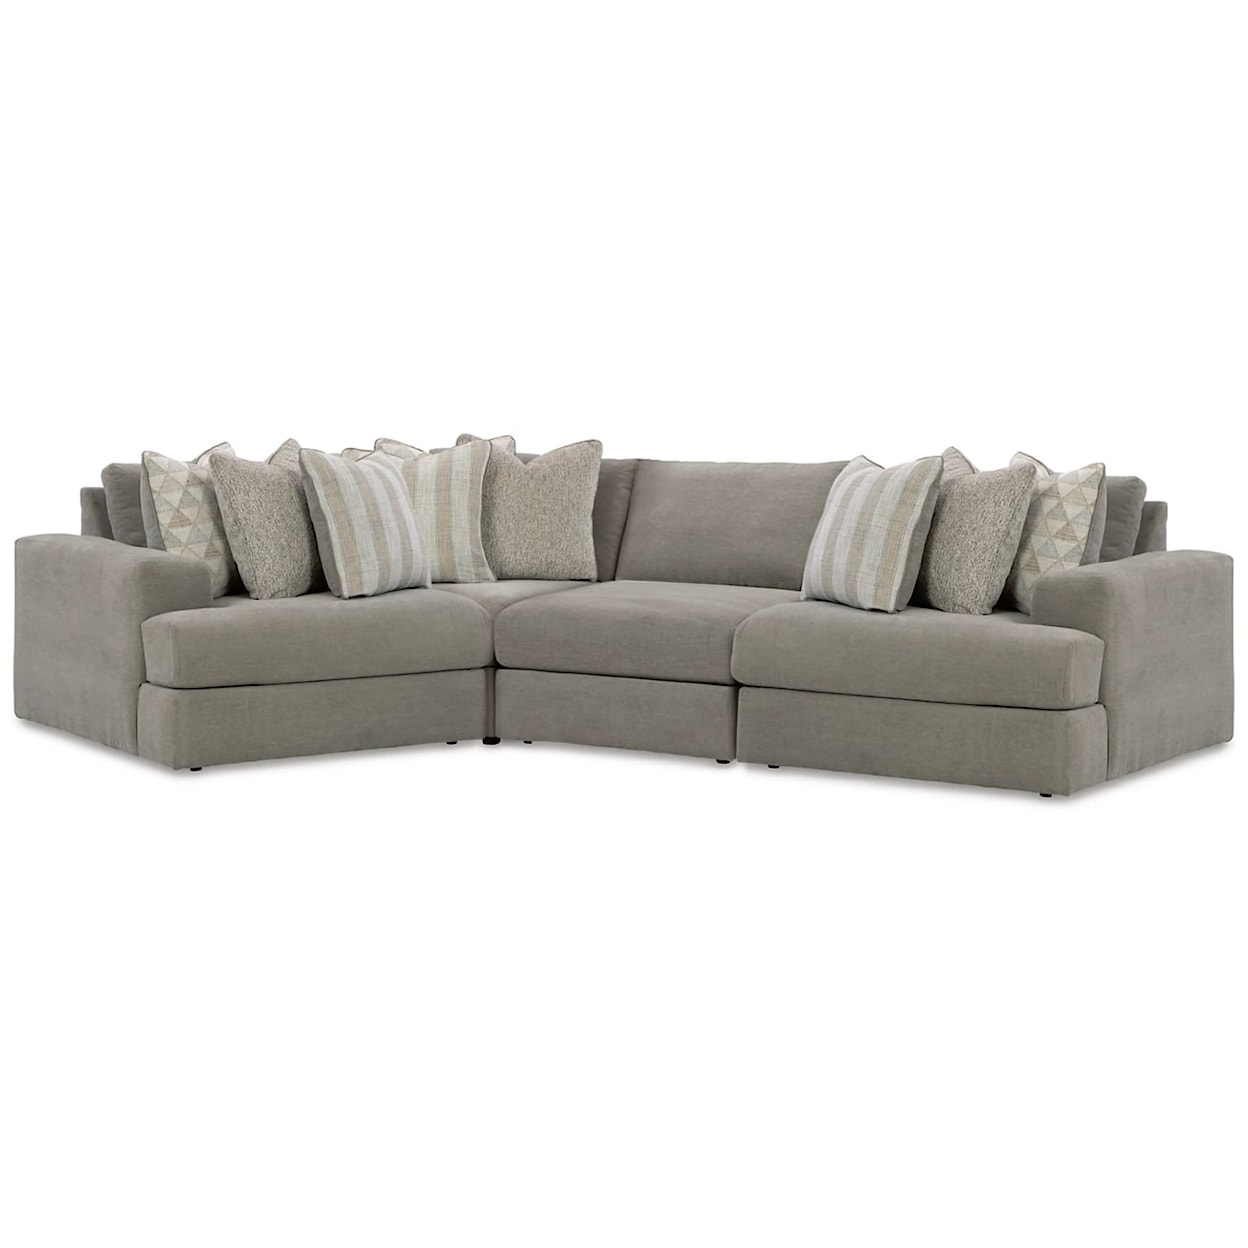 Signature Design by Ashley Avaliyah 4-Piece Sectional